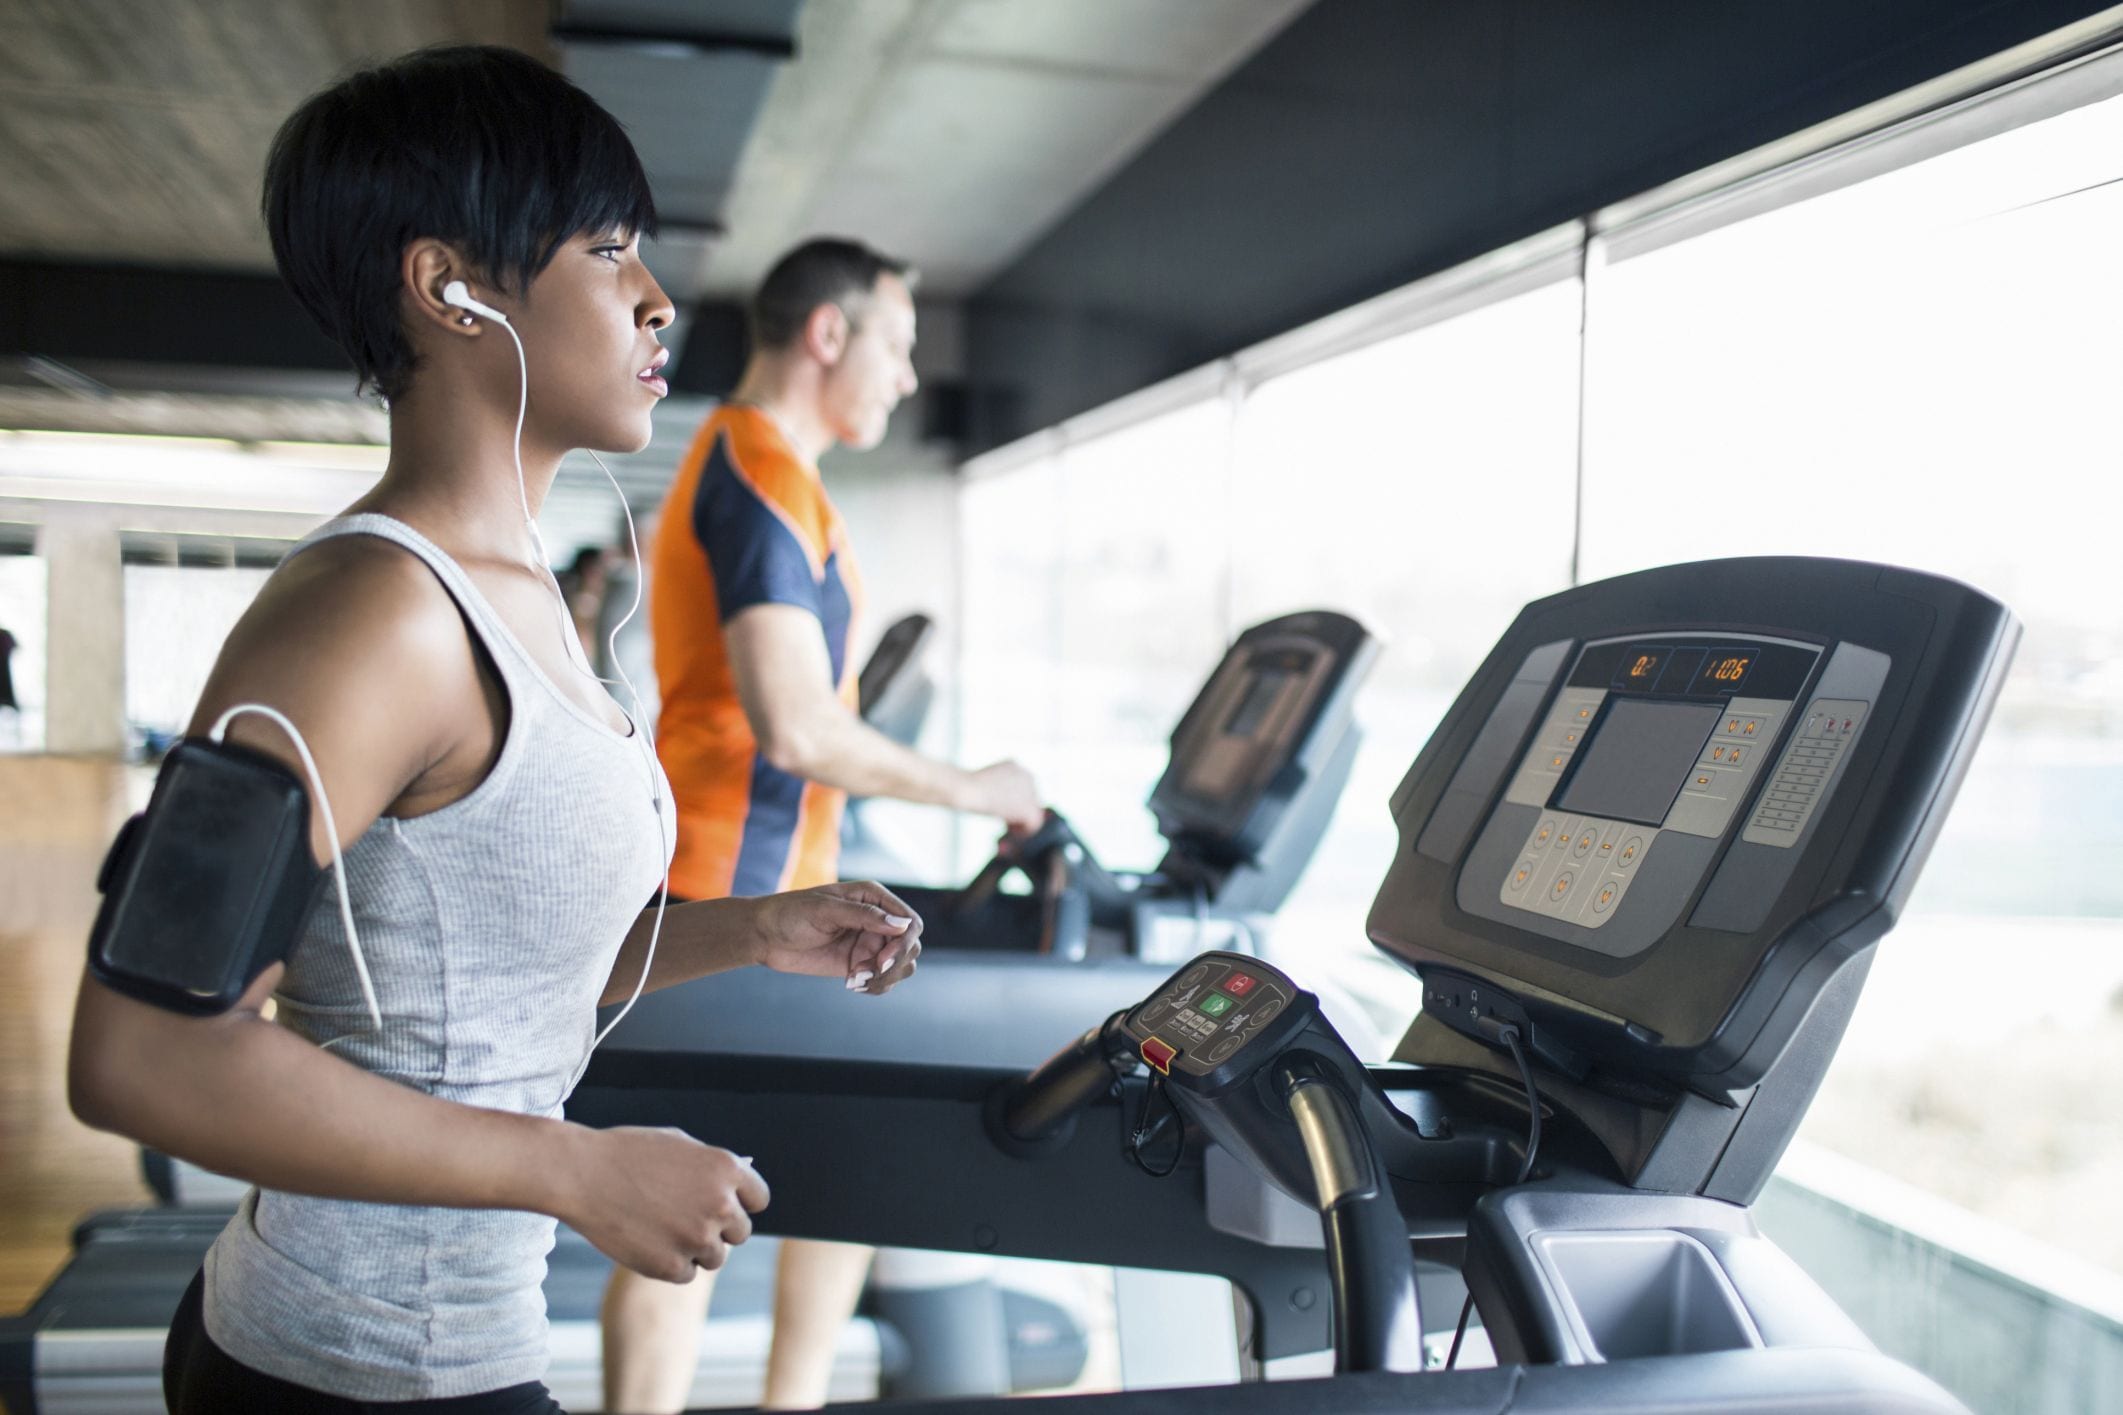 top 5 treadmill exercise tips and mistakes